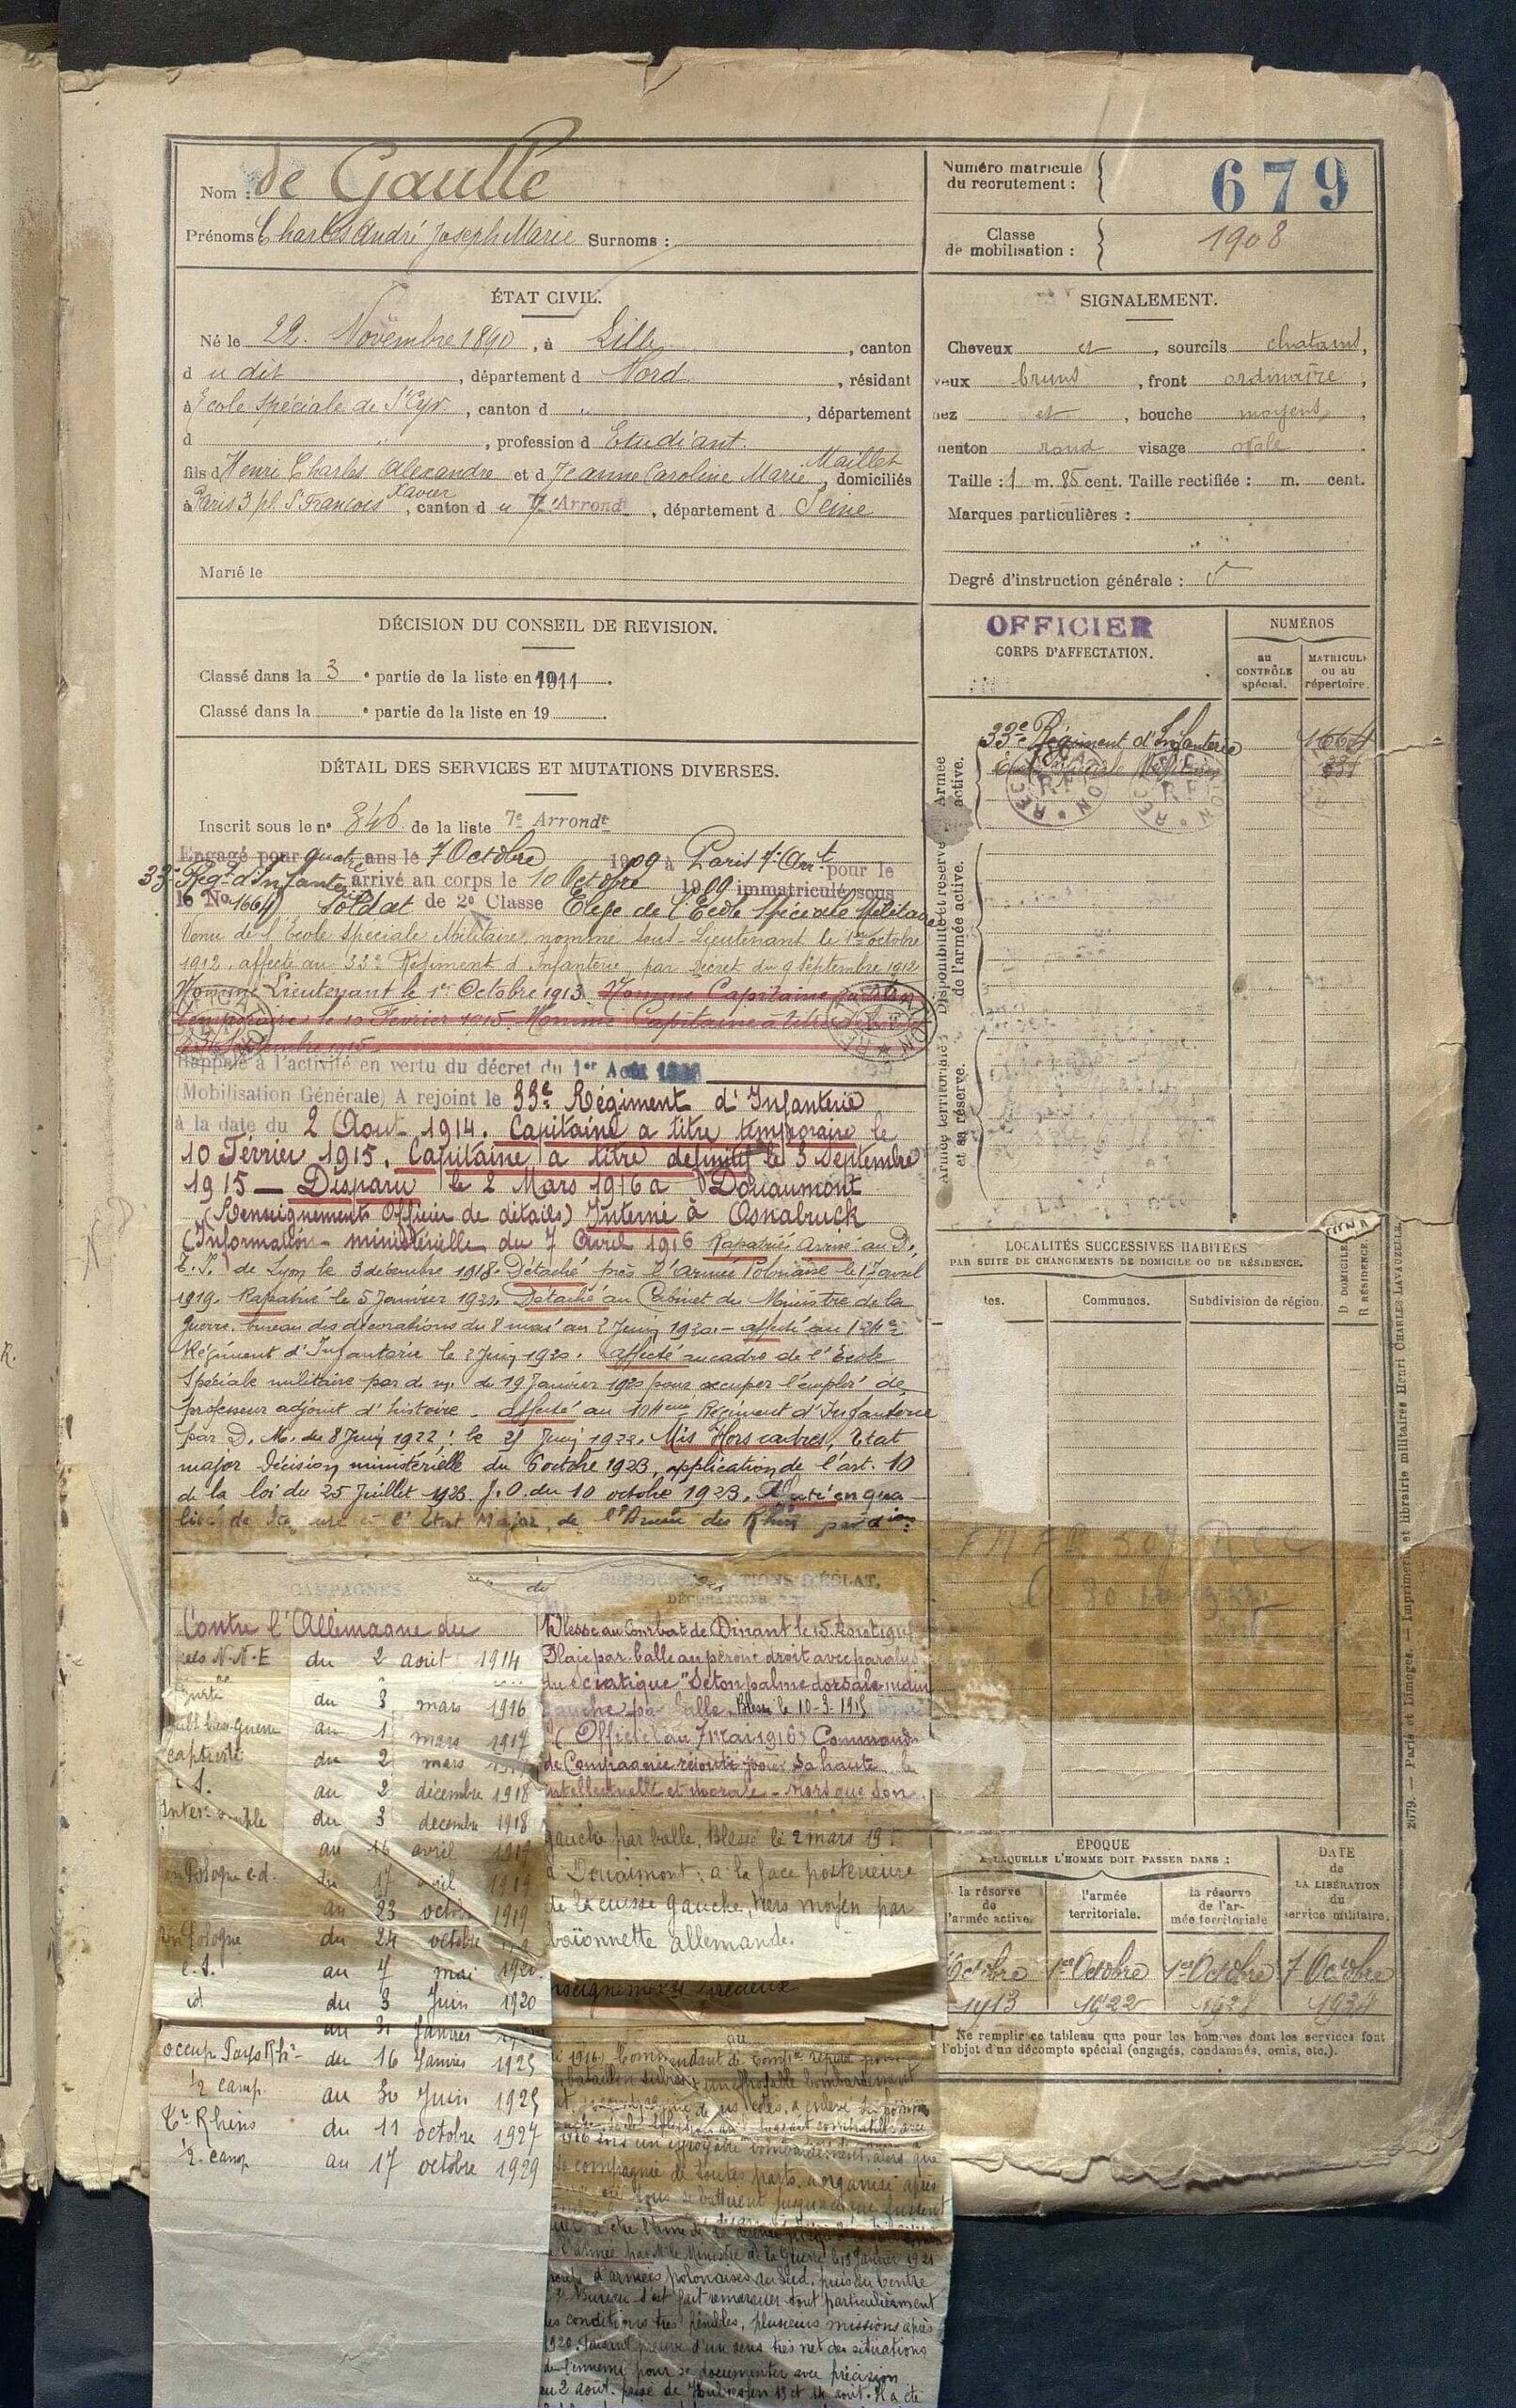 Military conscription entry for General Charles de Gaulle, found in the France, Military Conscripts of Seine collection.